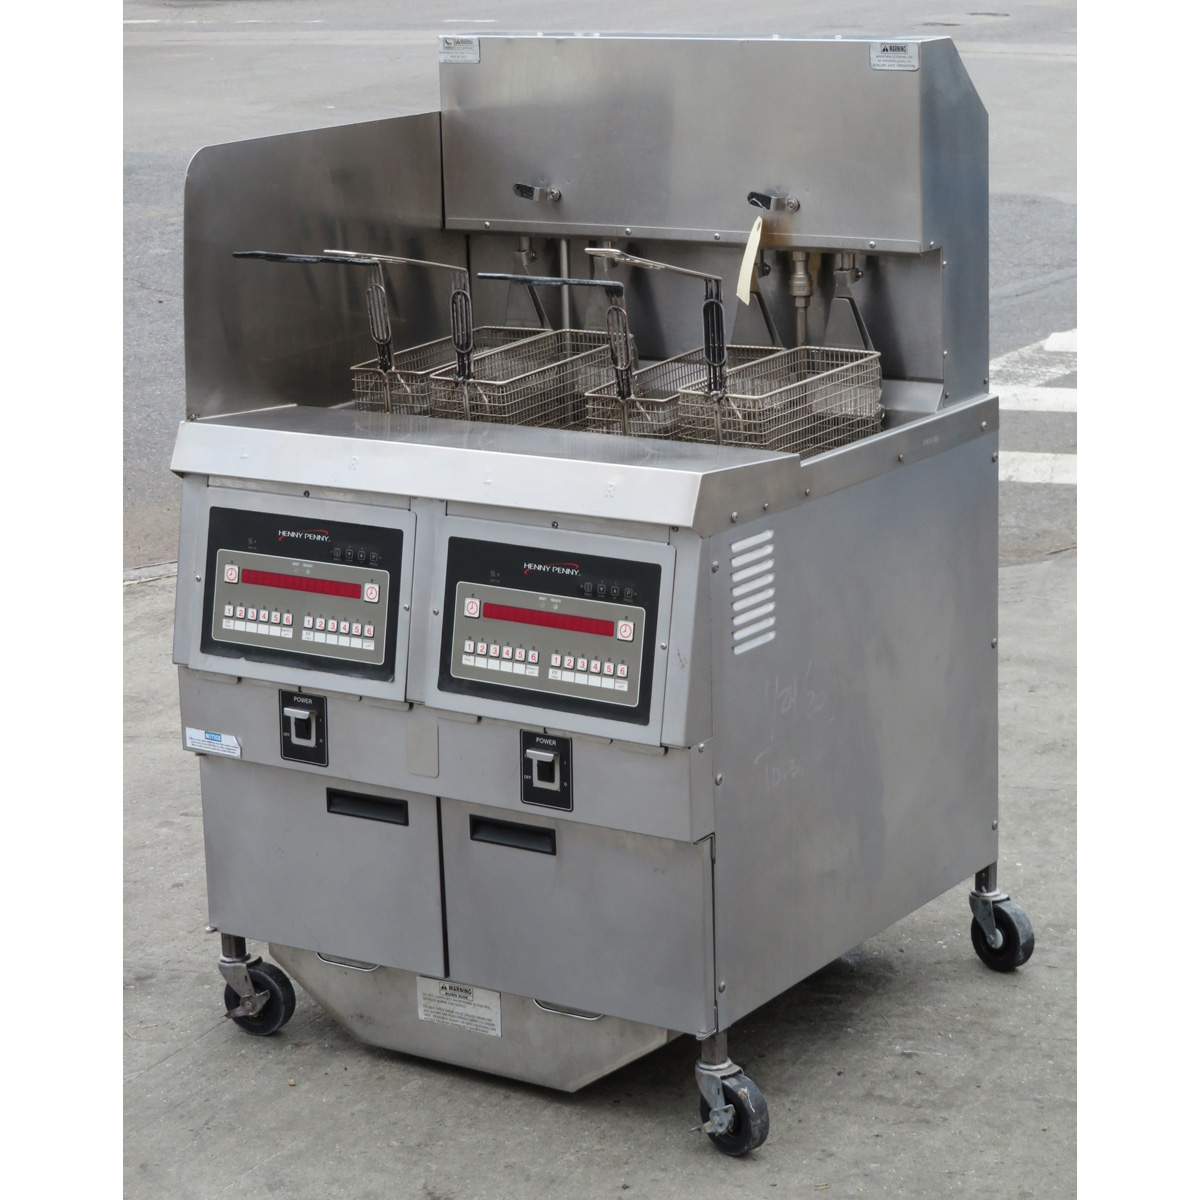 https://www.bakedeco.com/images/large/henny_penny_oga-322_fryer_used_great_condition_56177.JPG